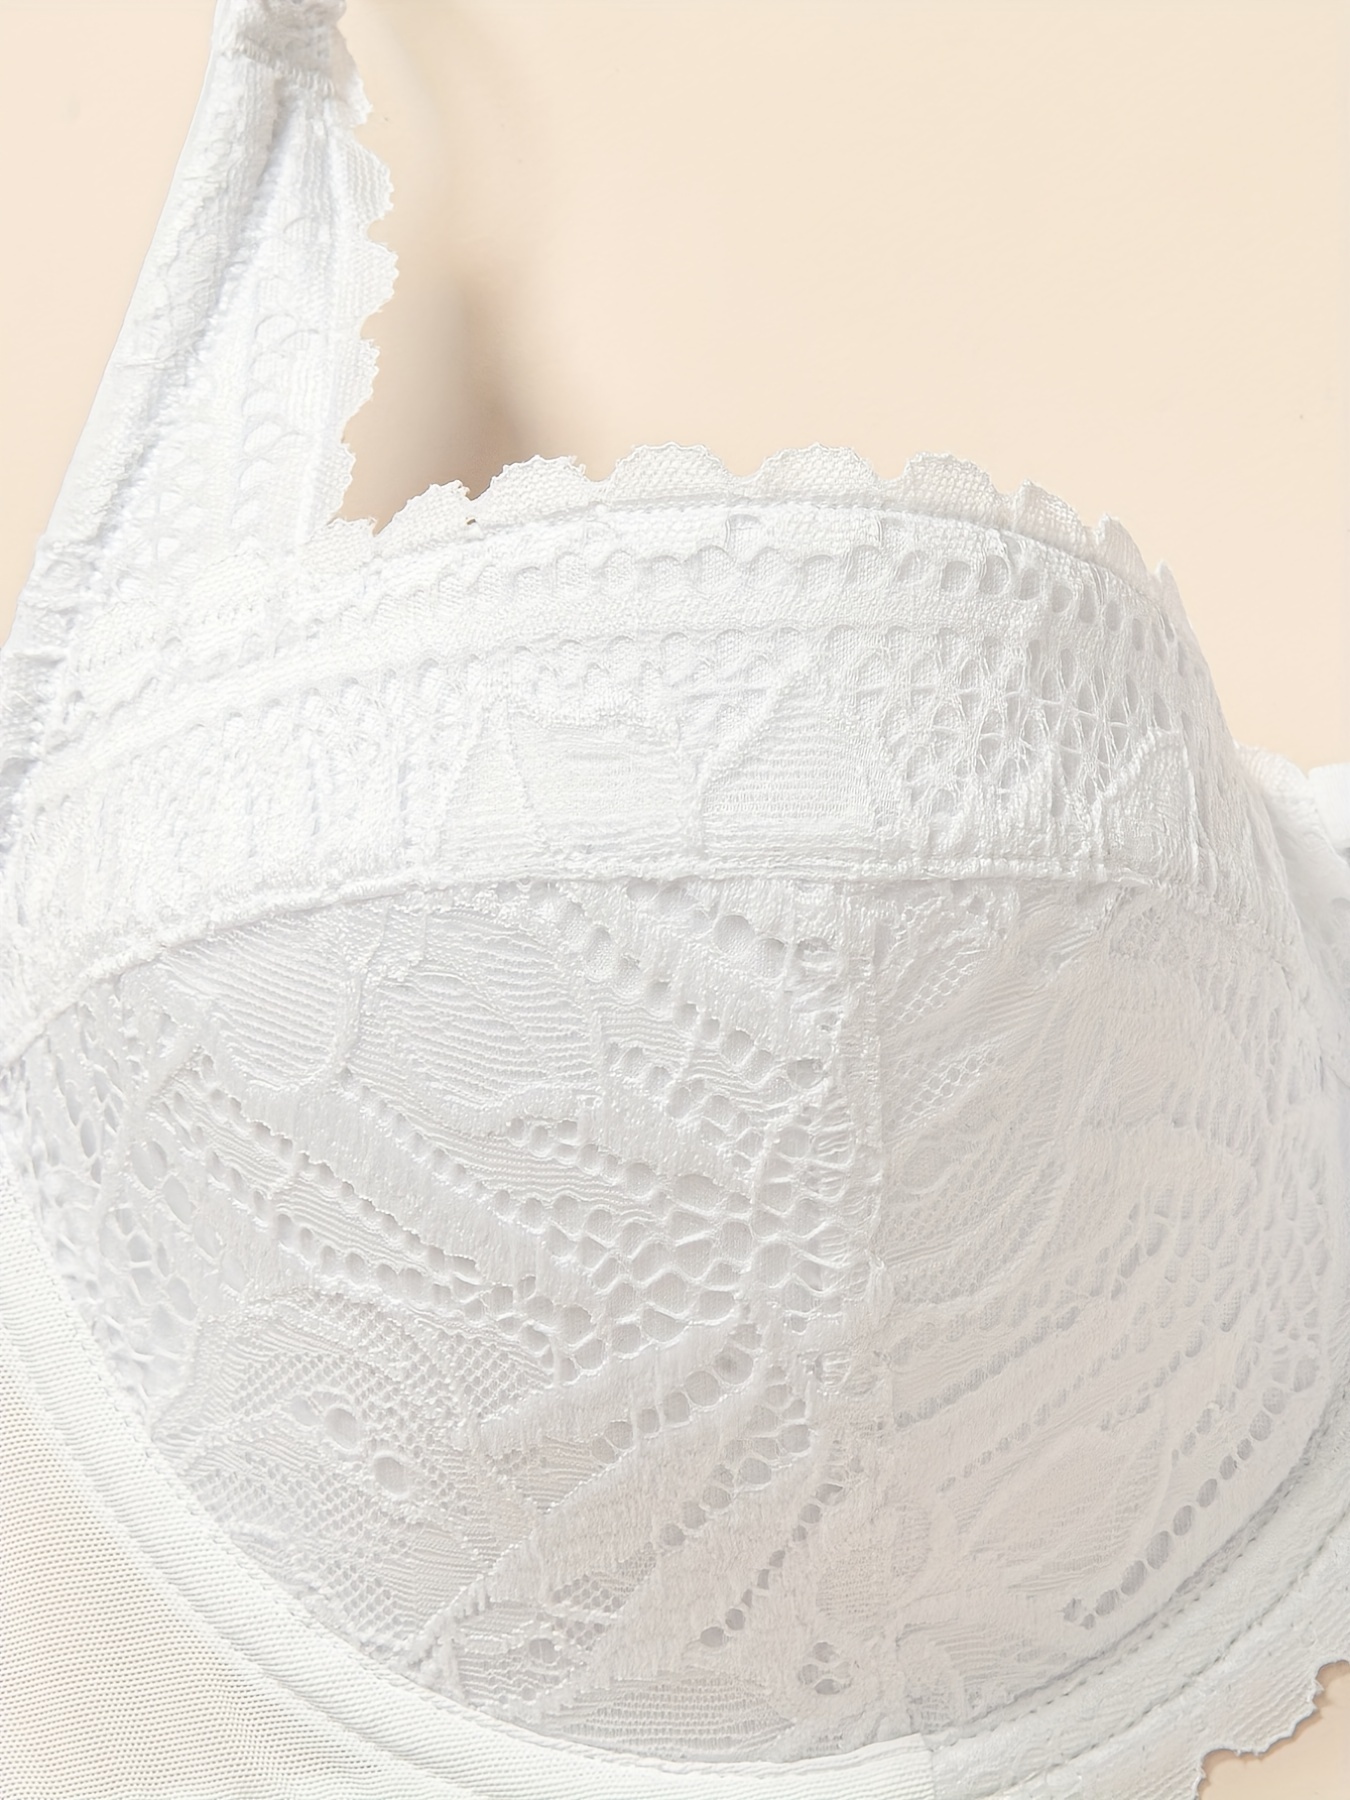 Pearly white graphic lace push-up balconette bra Daily Glam